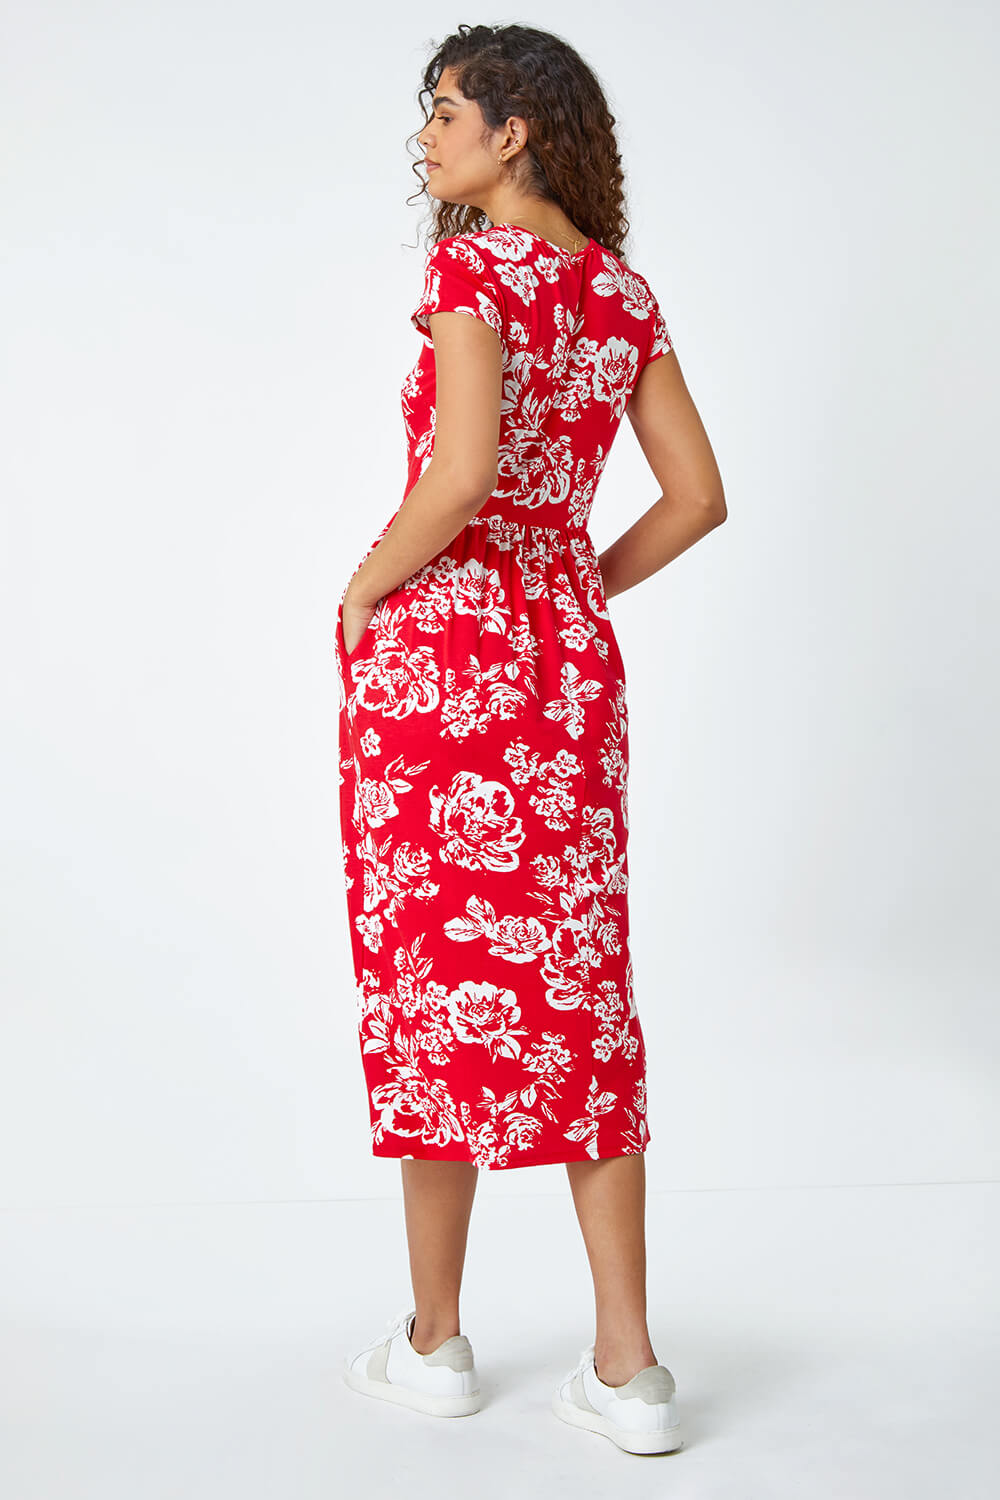 Red Floral Print Midi Stretch Dress, Image 3 of 5